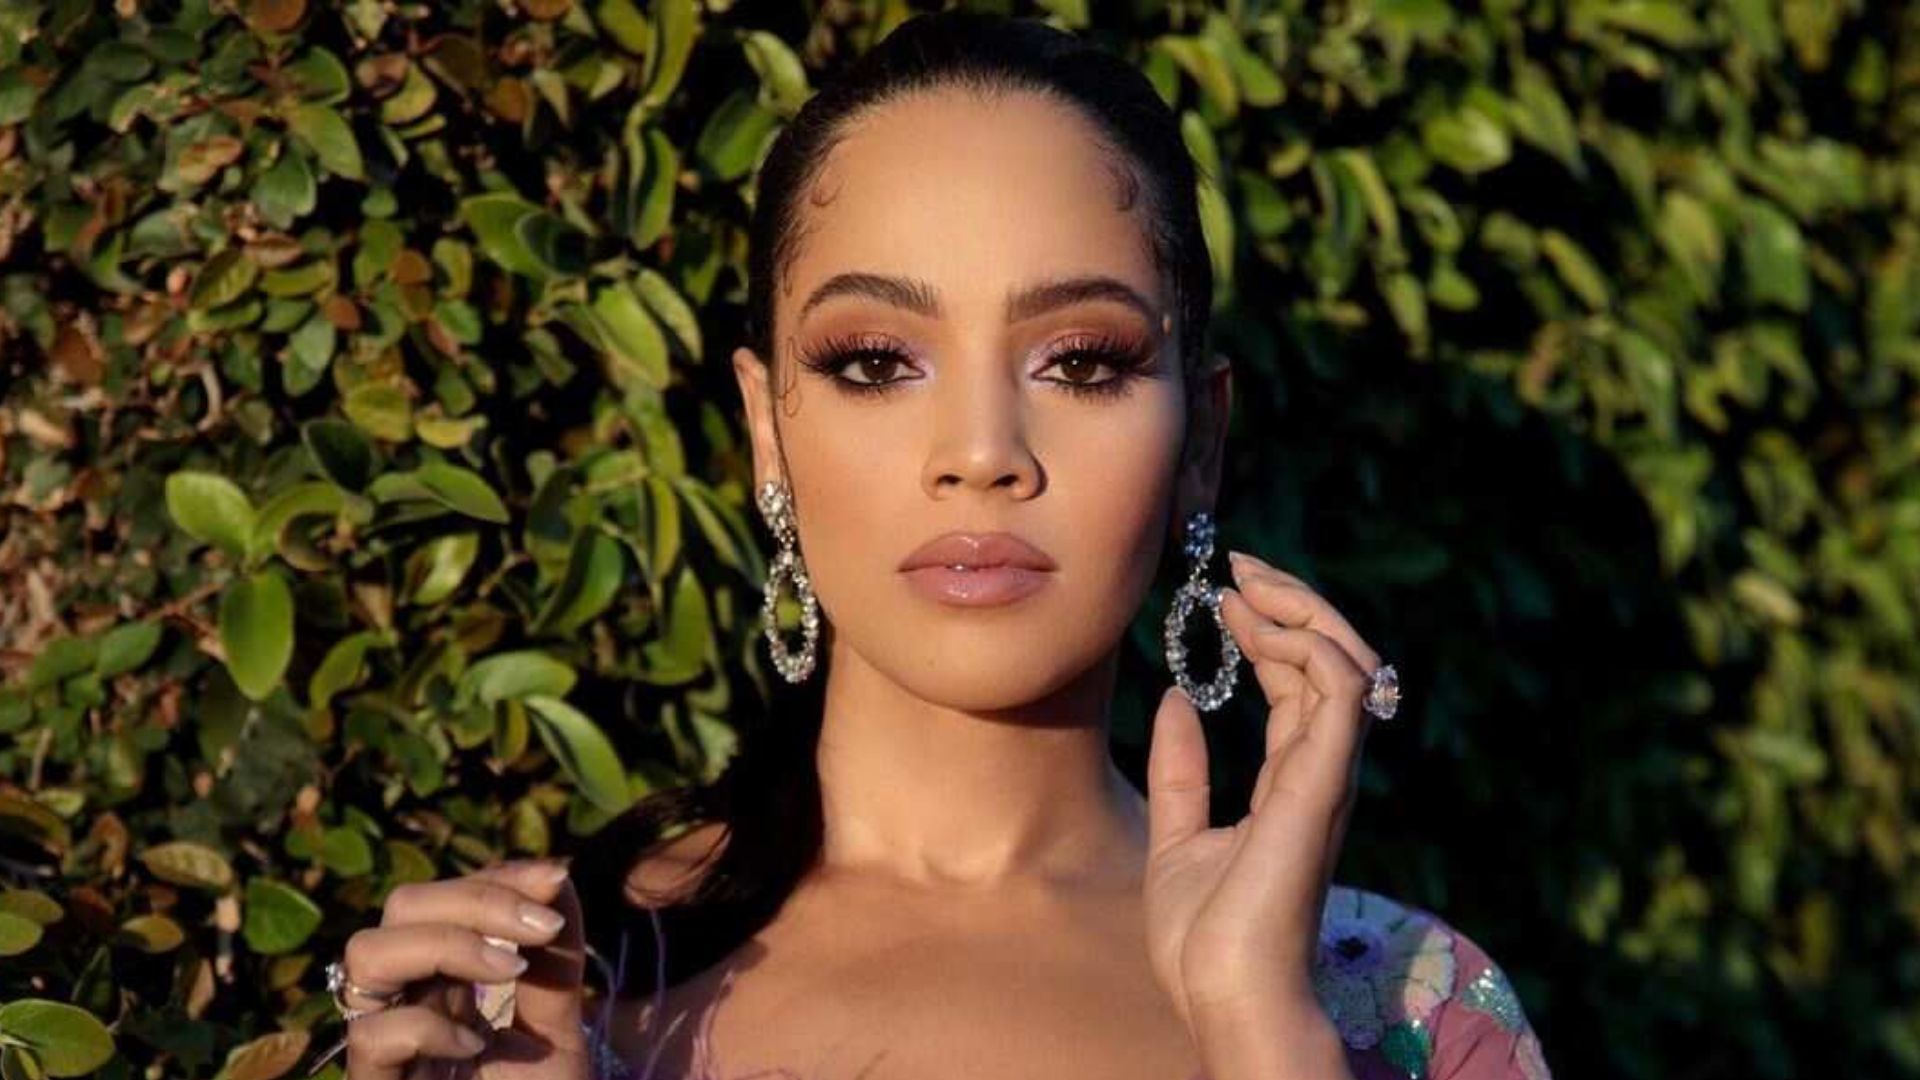 Inside the world of Bianca Lawson: net worth, relationships, and more